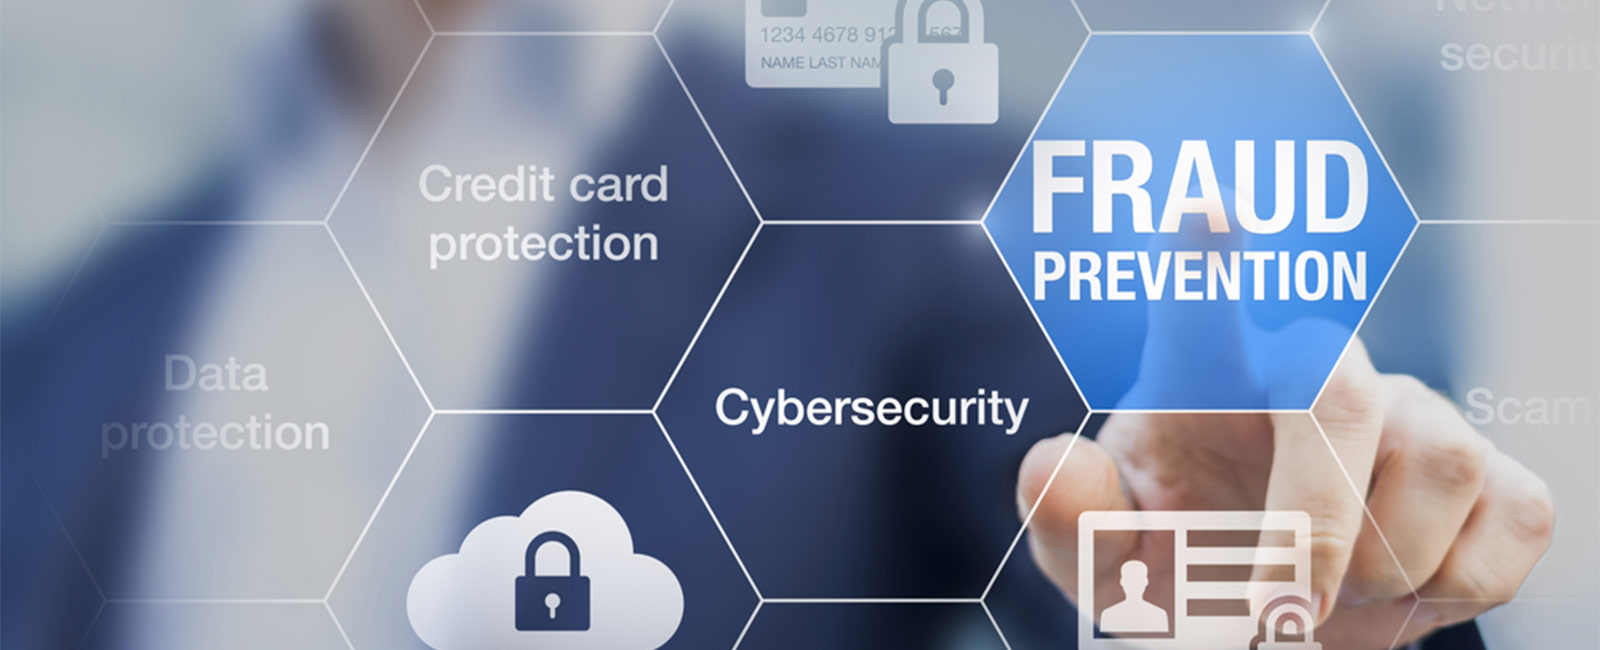 Graphic with a hand pointing to Fraud Prevention